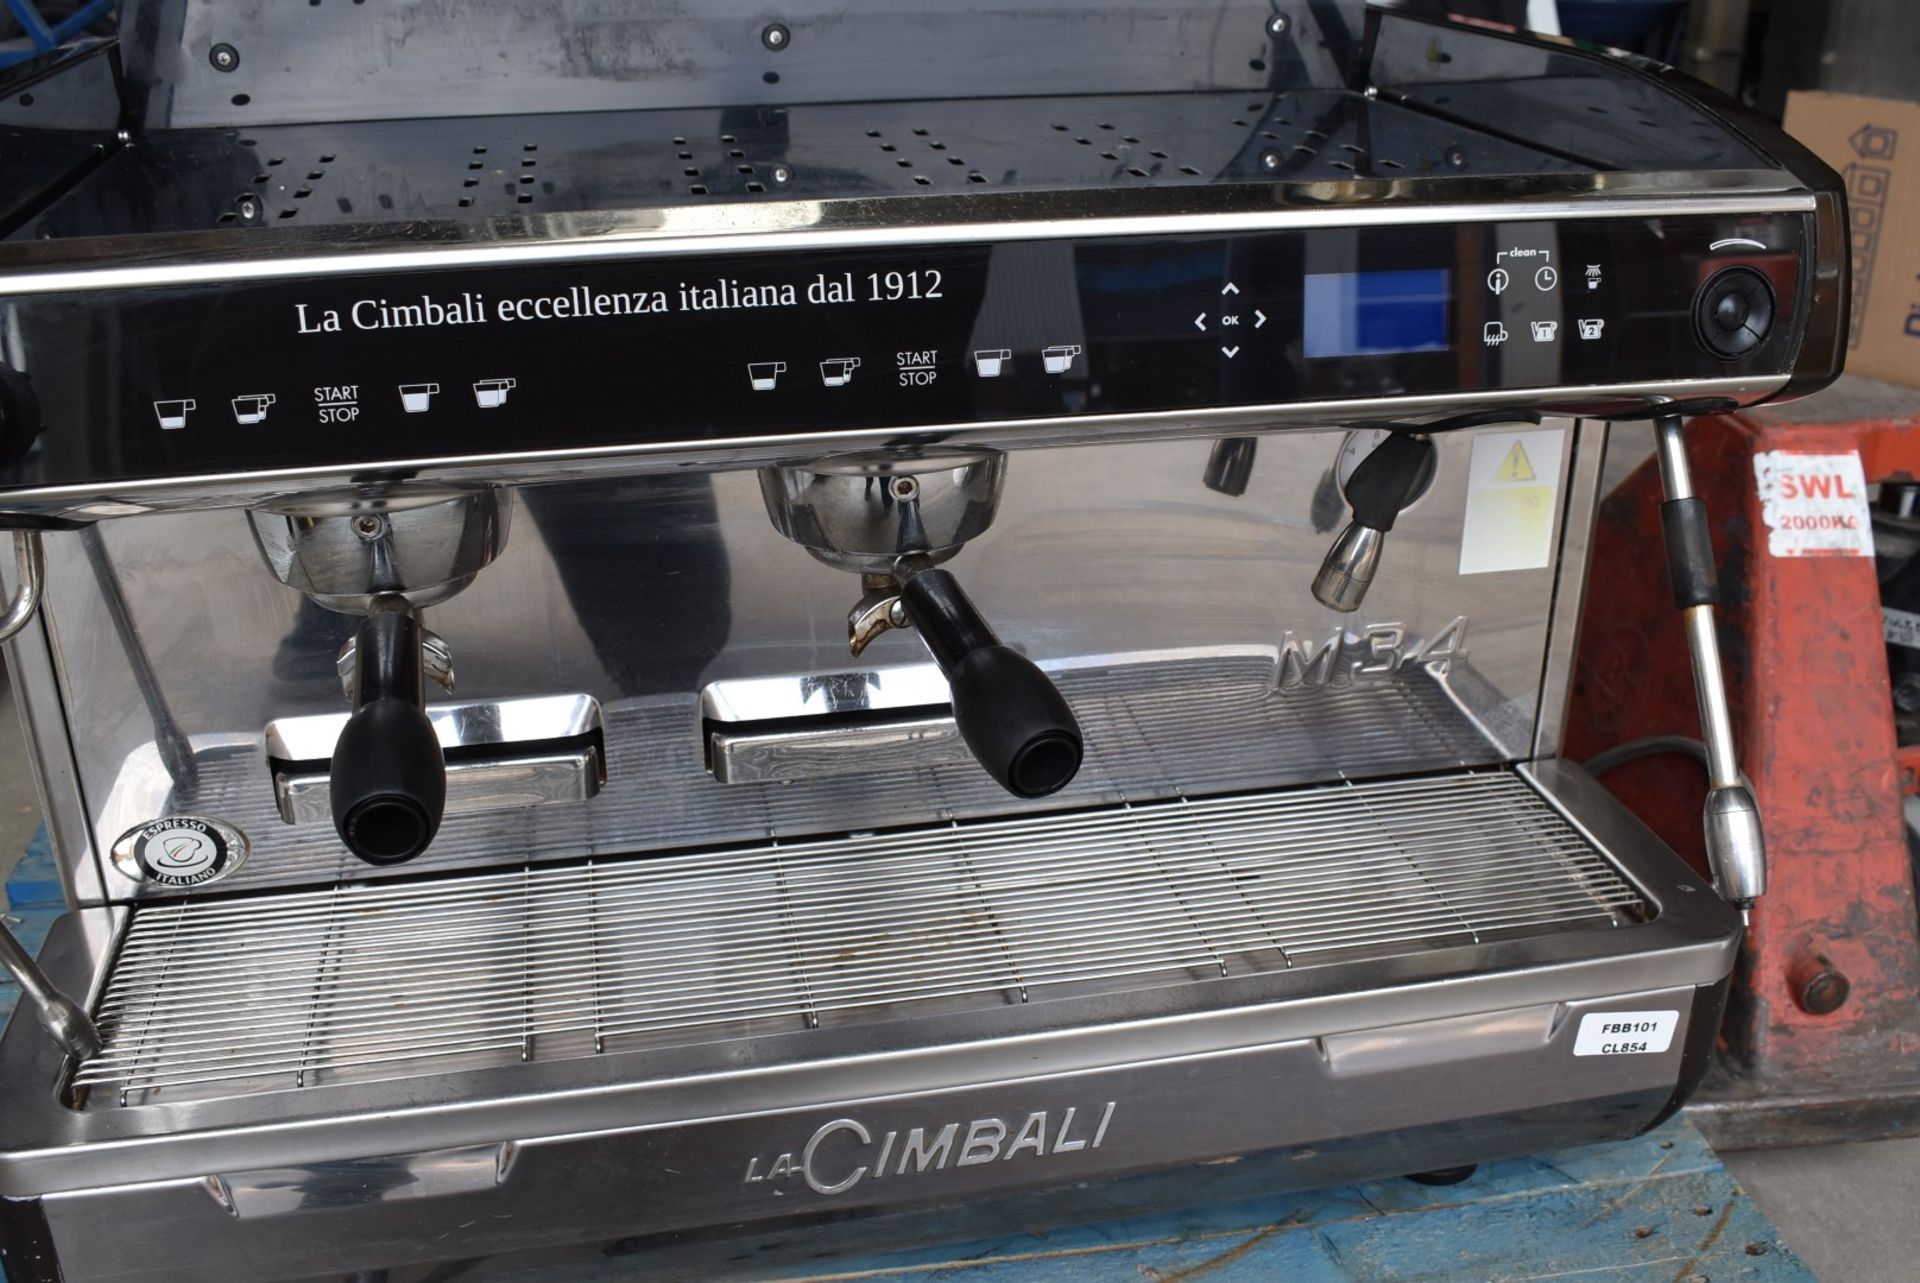 1 x La Cimbali M34 Selectron DT/2 2 Group Tall Cup Espresso Coffee Machine - 2017 Model - Image 6 of 21